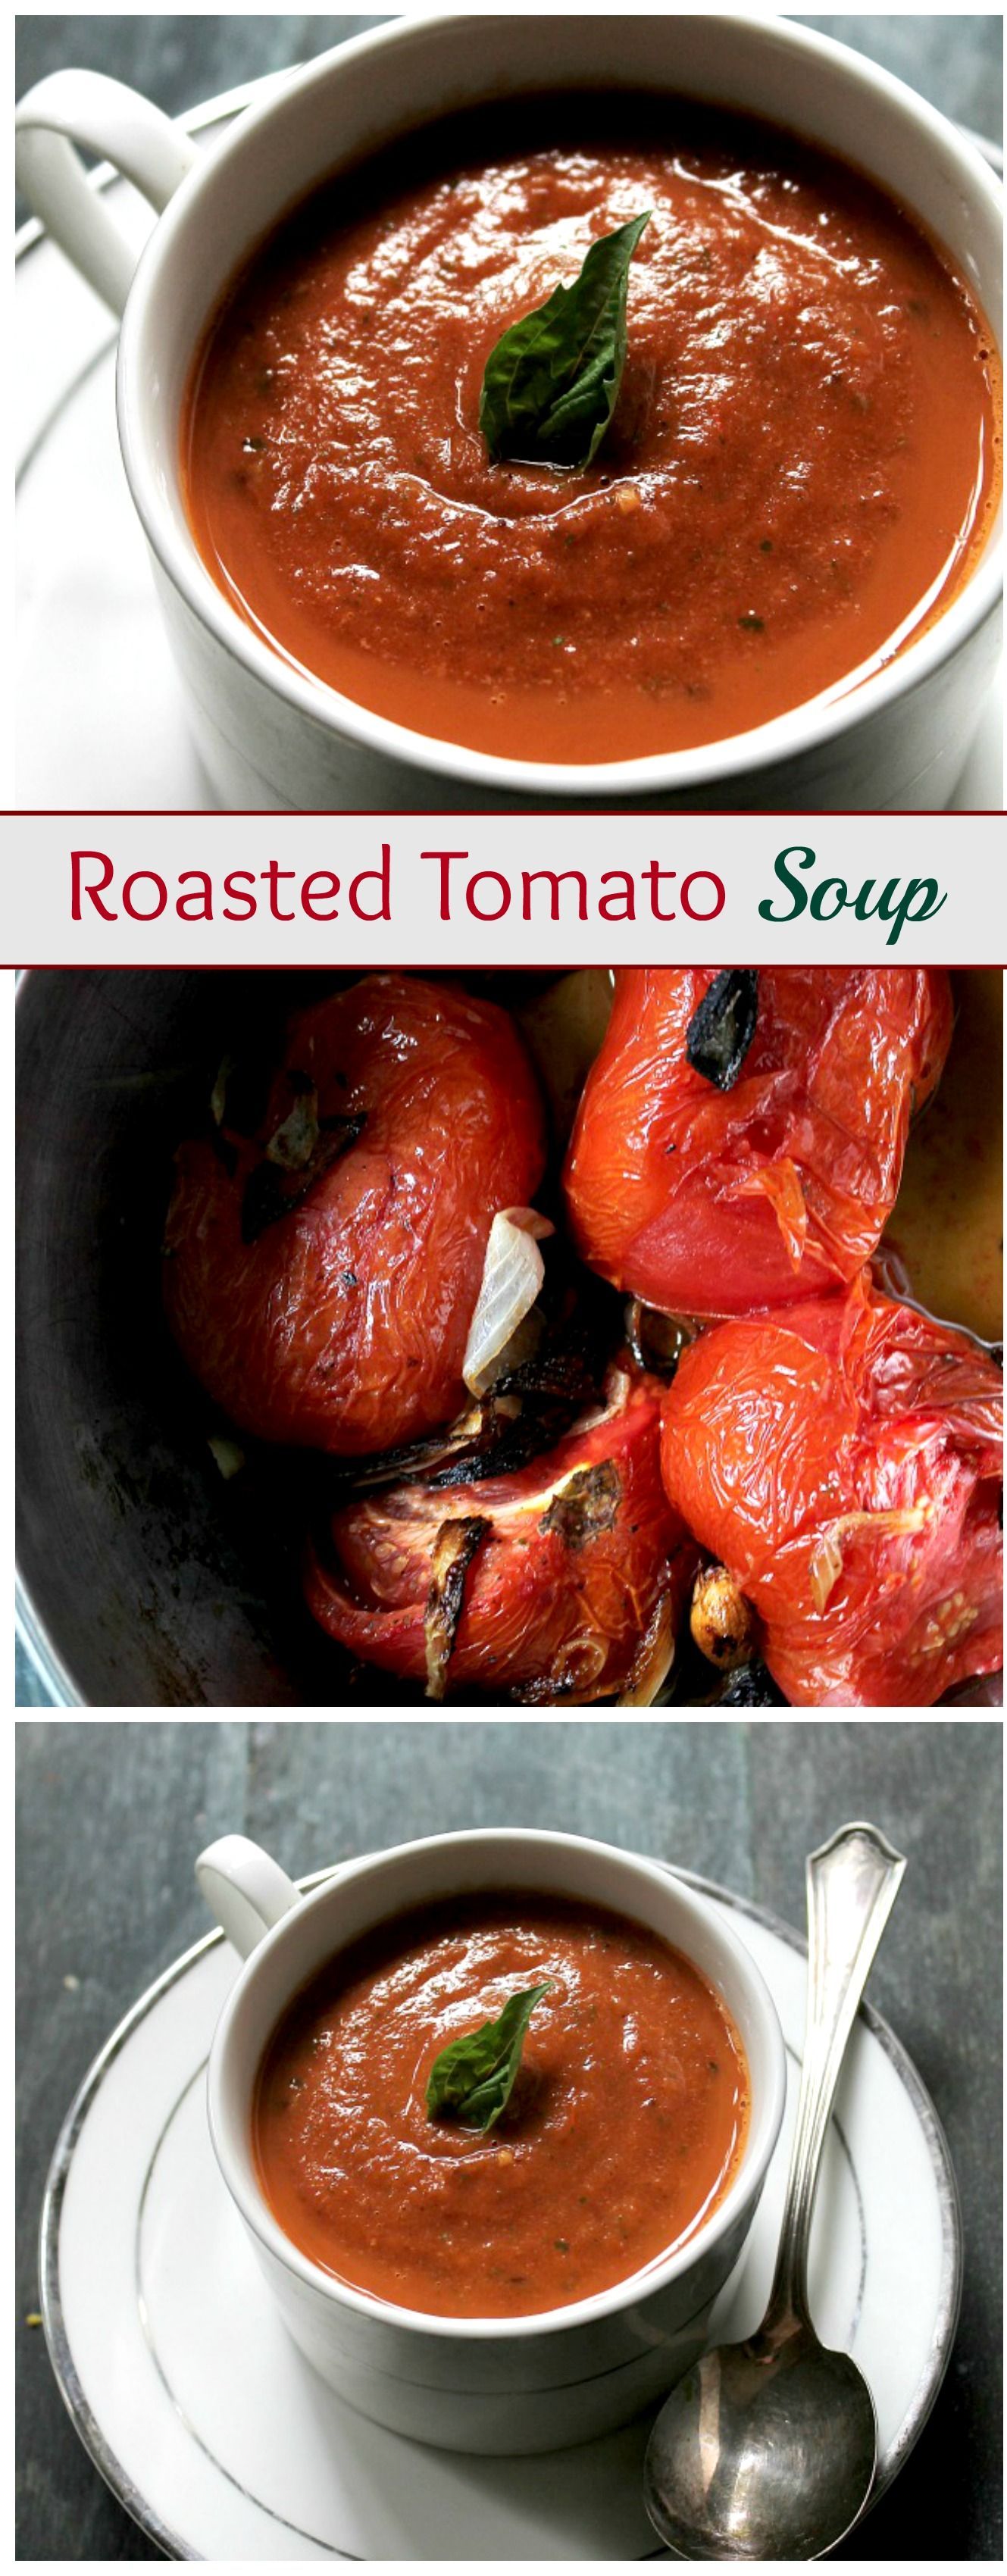 A delicious Roasted Tomato Soup made with garden fresh tomatoes, garlic, onions, and basil. This is my FAVORITE soup recipe!